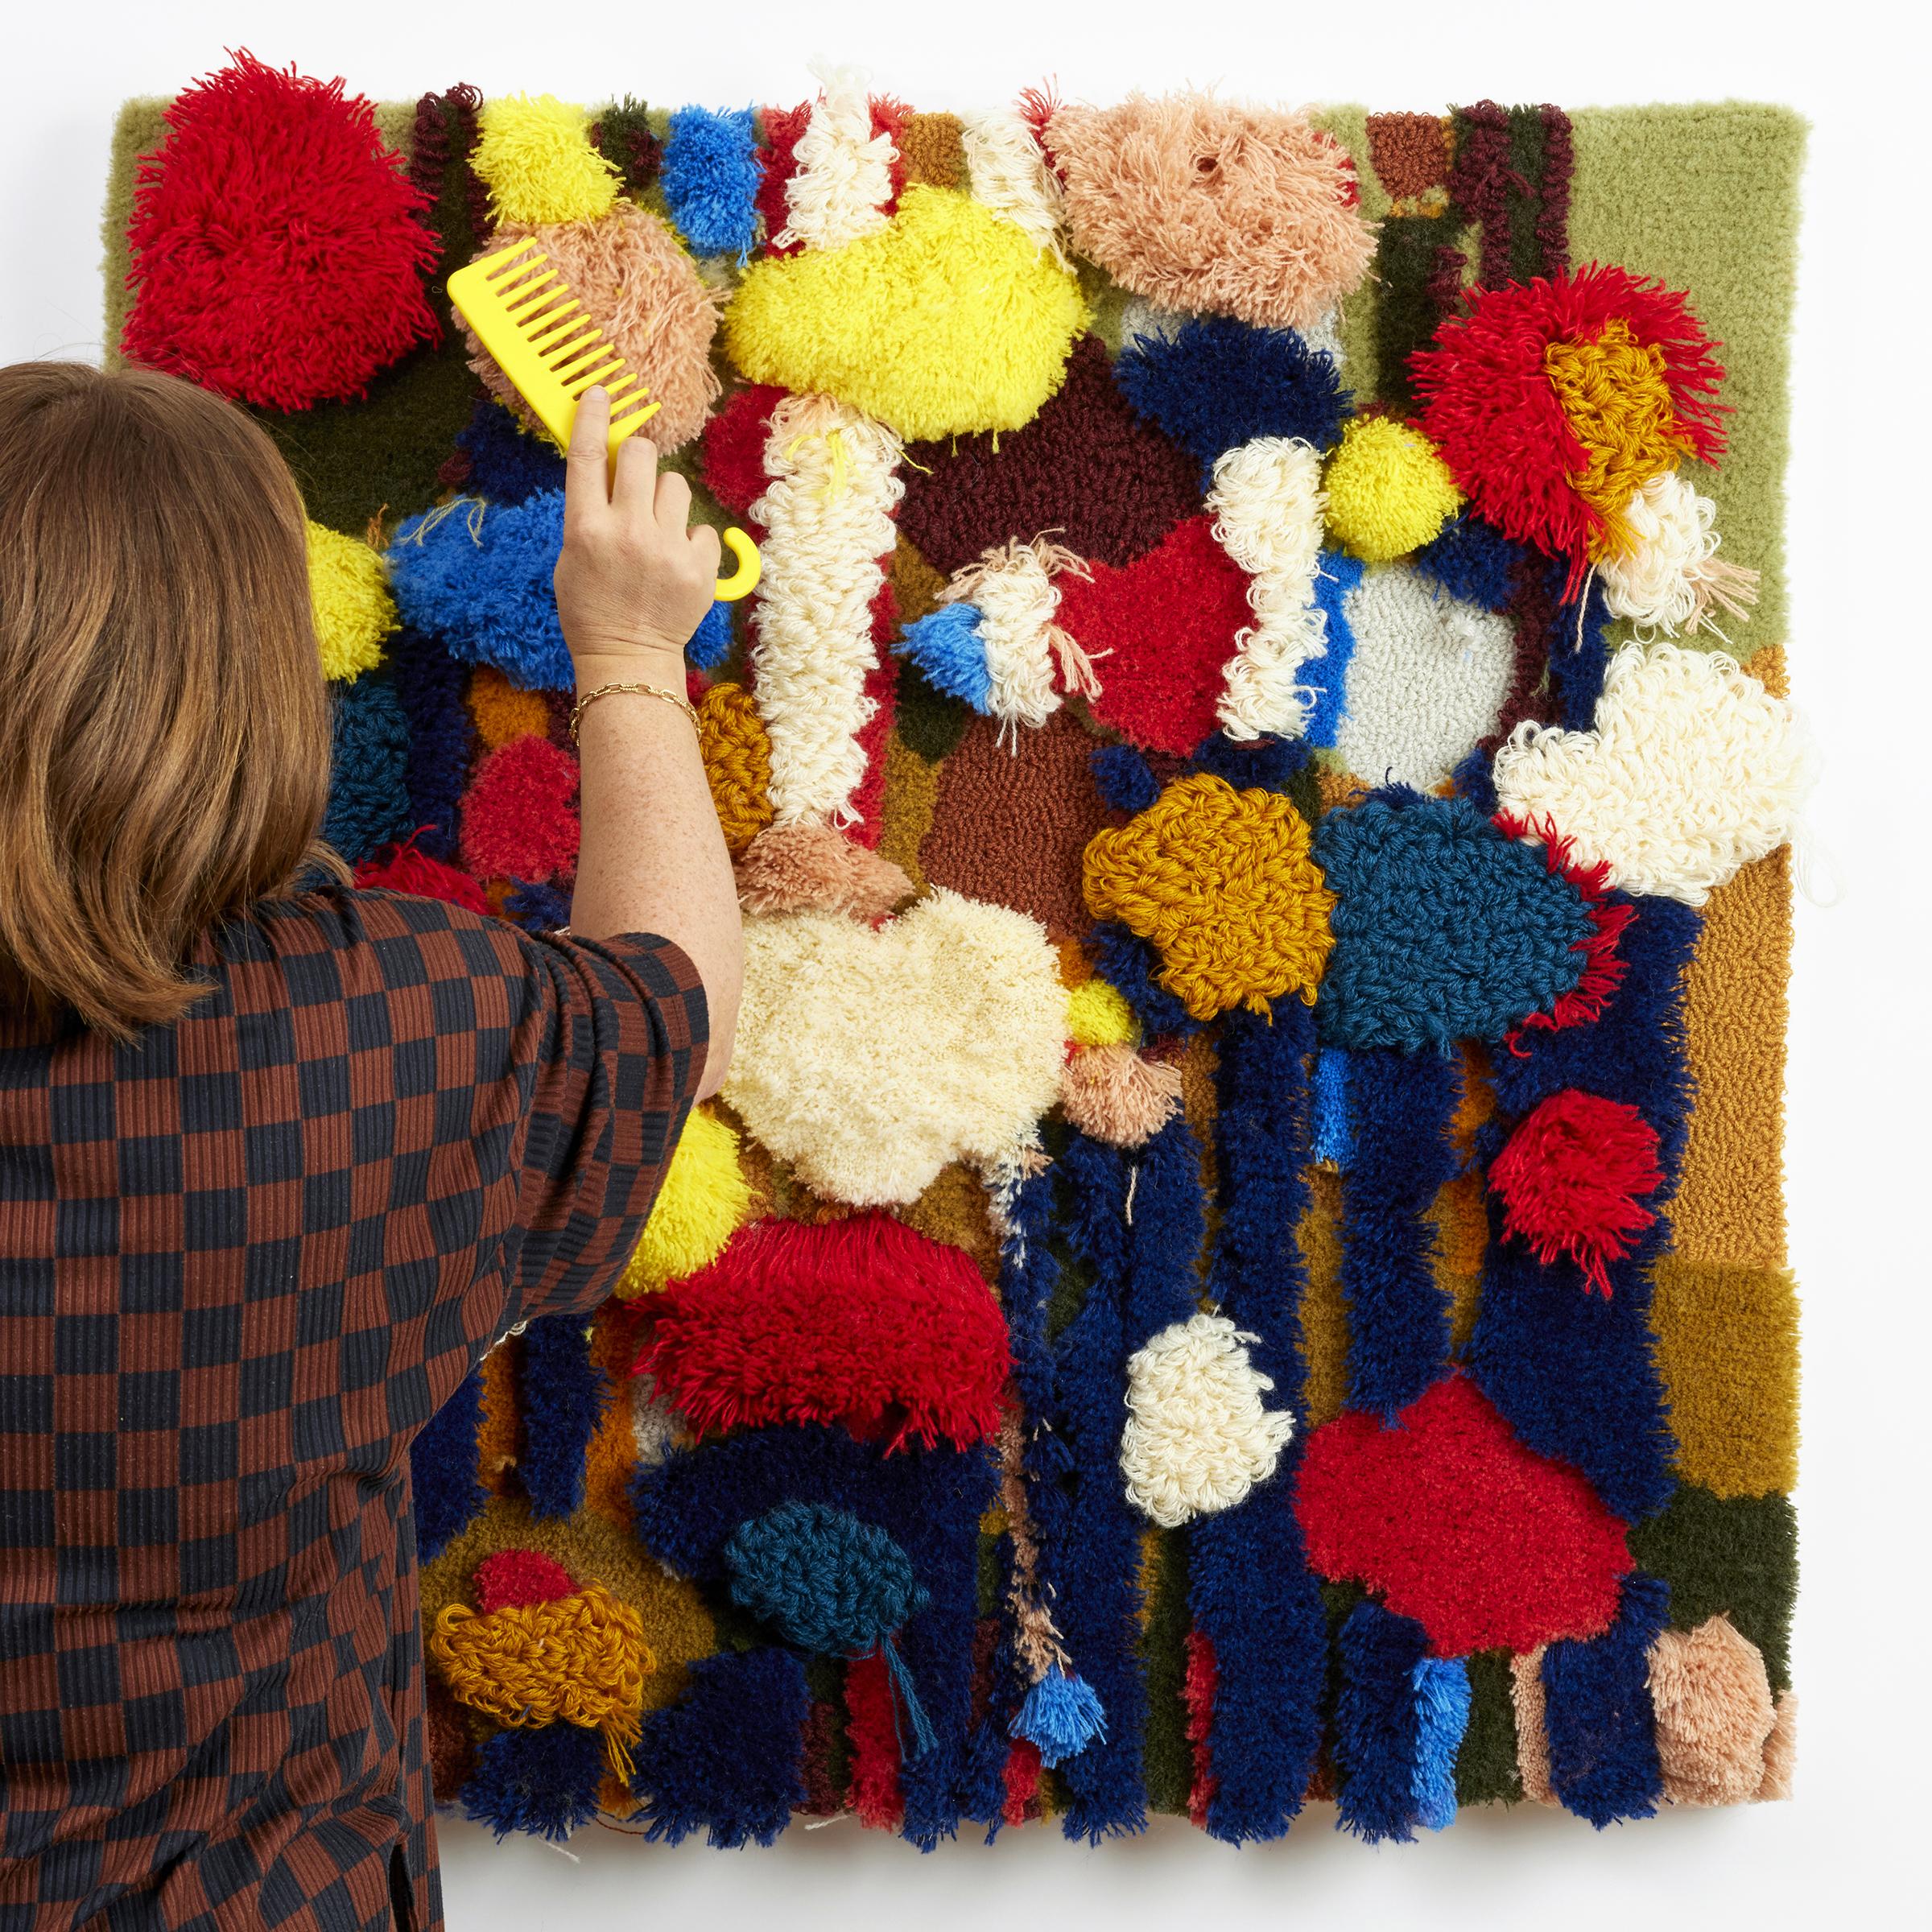 'Come What May' - contemporary fiber art, texture, pattern, dots, tufting - Sculpture by Trish Andersen